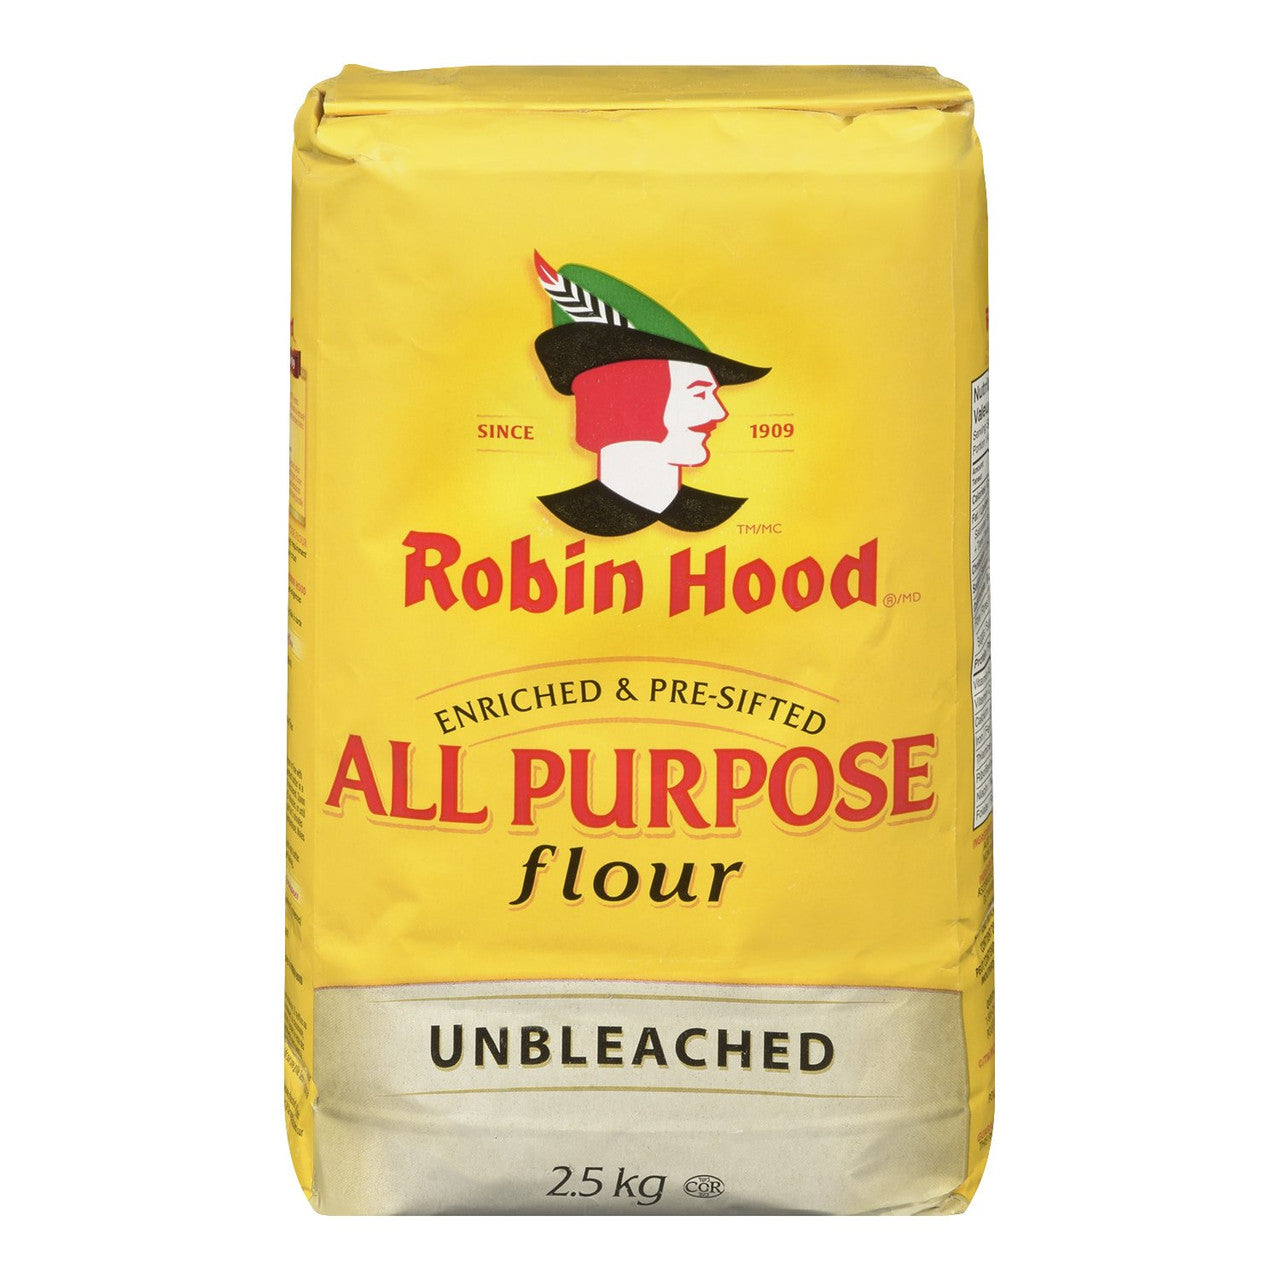 Robin Hood, Unbleached, All Purpose Flour, 2.5kg/5.5lbs, {Imported from Canada}